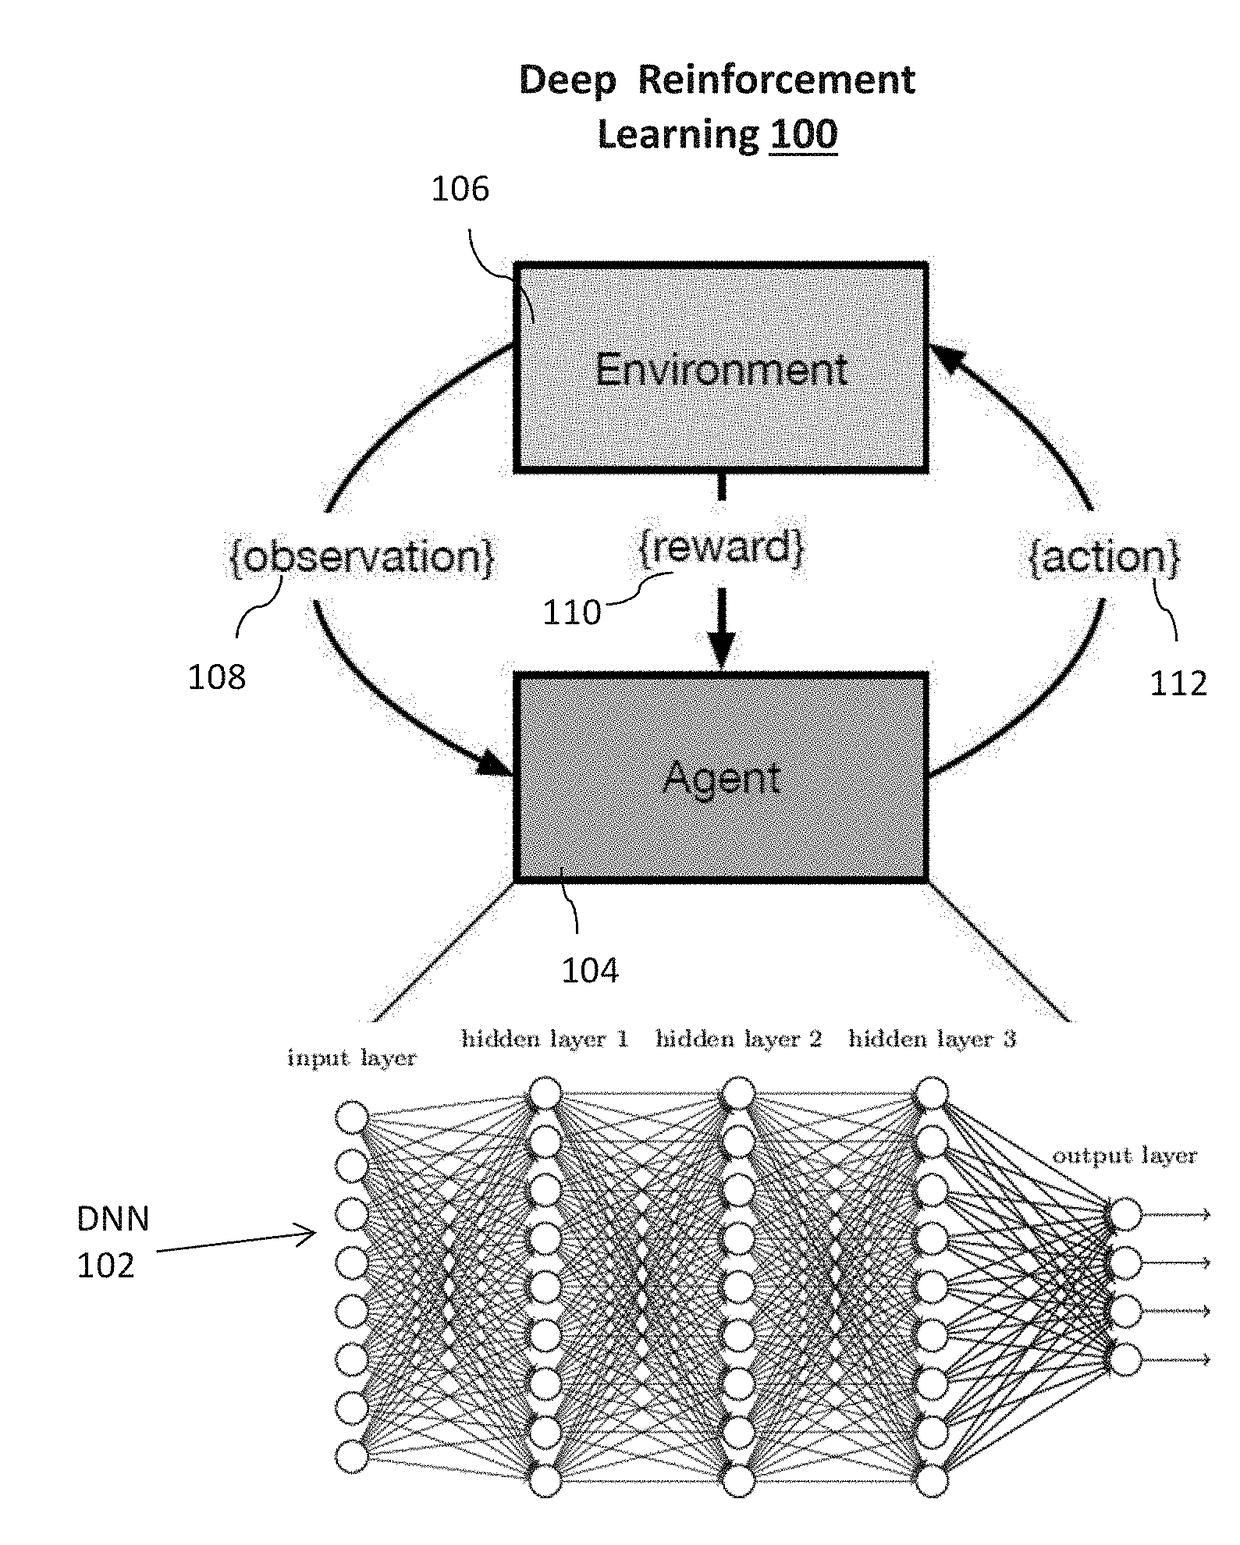 Control systems using deep reinforcement learning